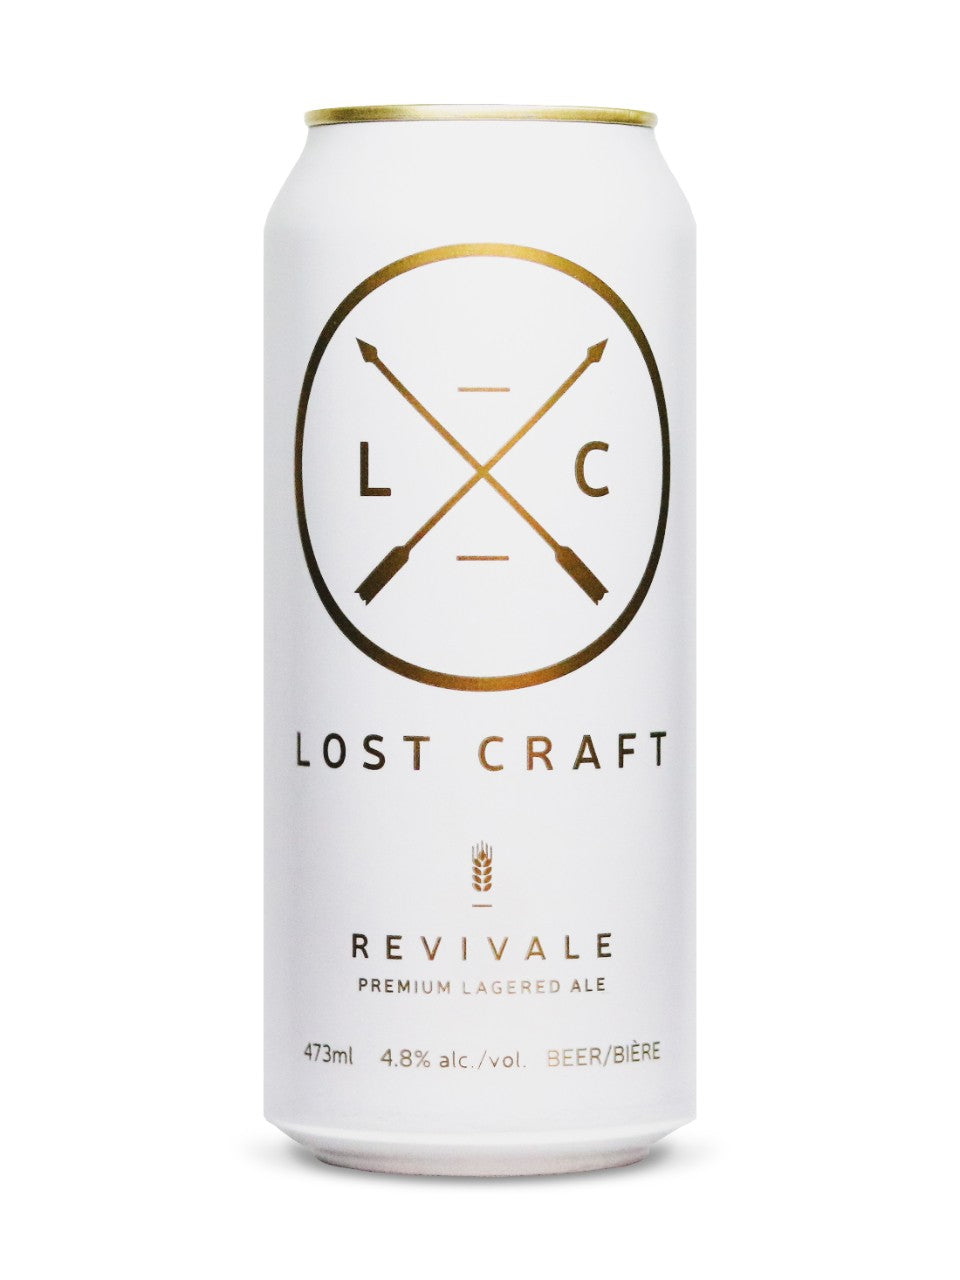 Lost Craft Revivale 473 mL can